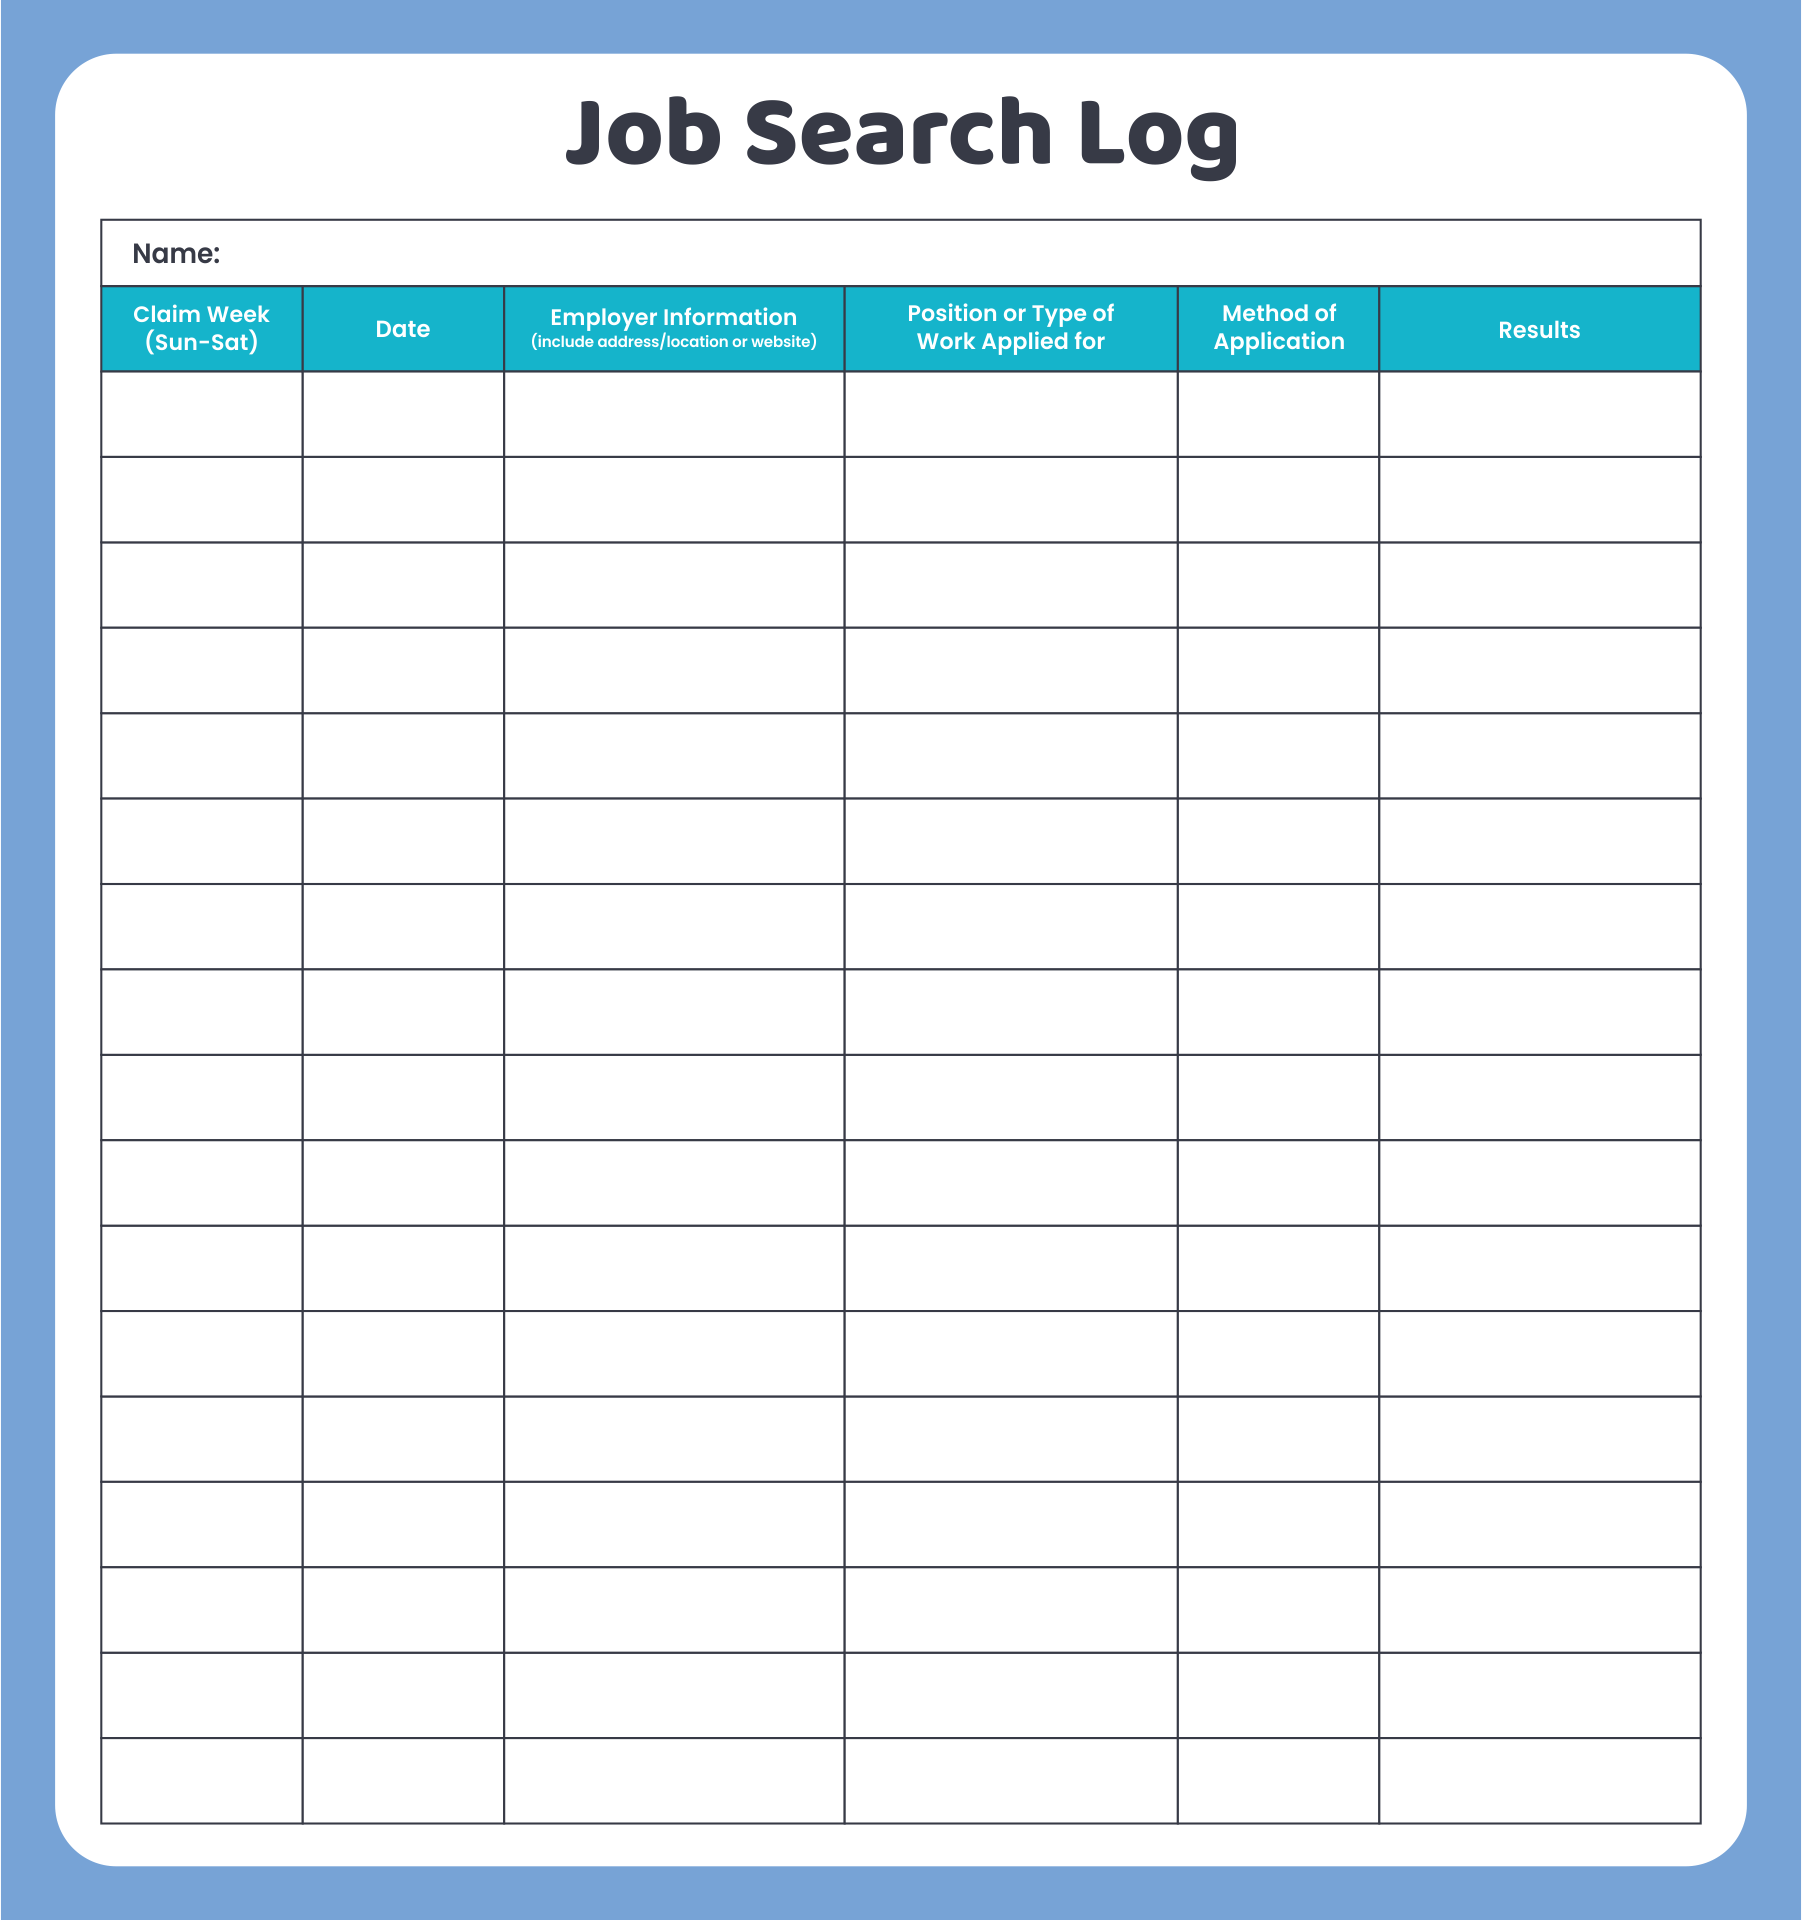 6-best-images-of-job-search-log-template-printable-job-search-log